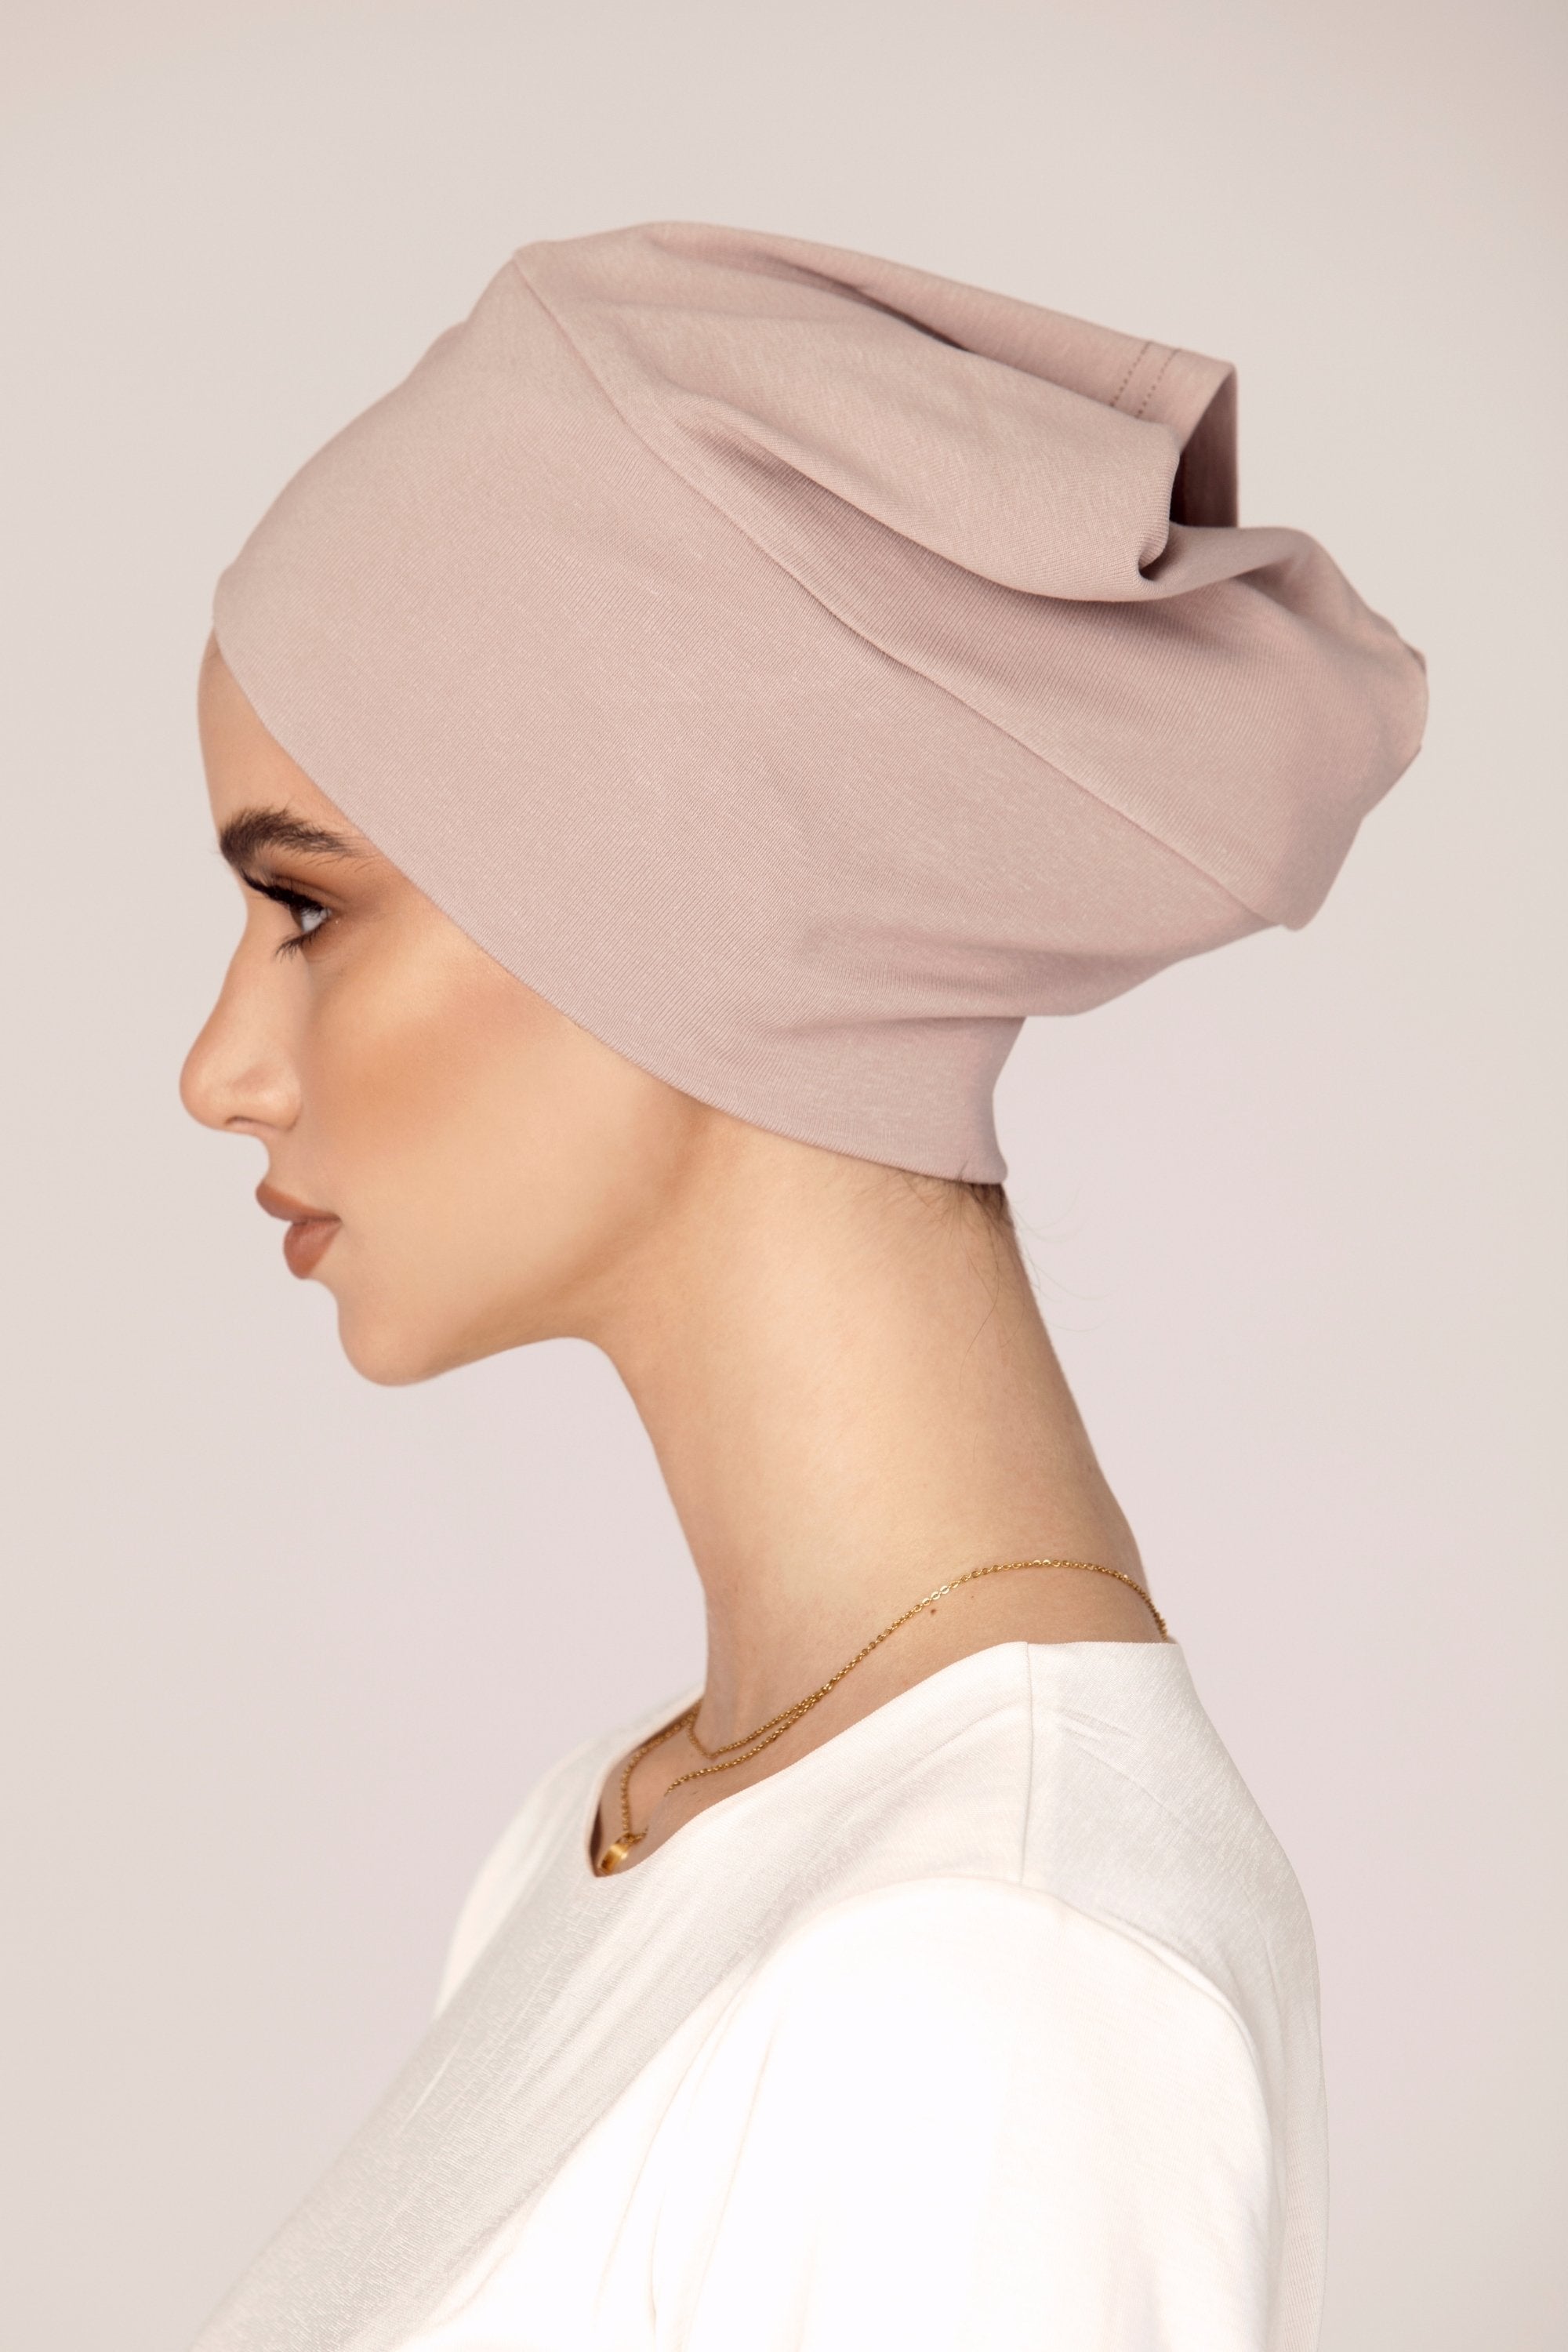 Criss Cross Undercap - Taupe Veiled Collection 